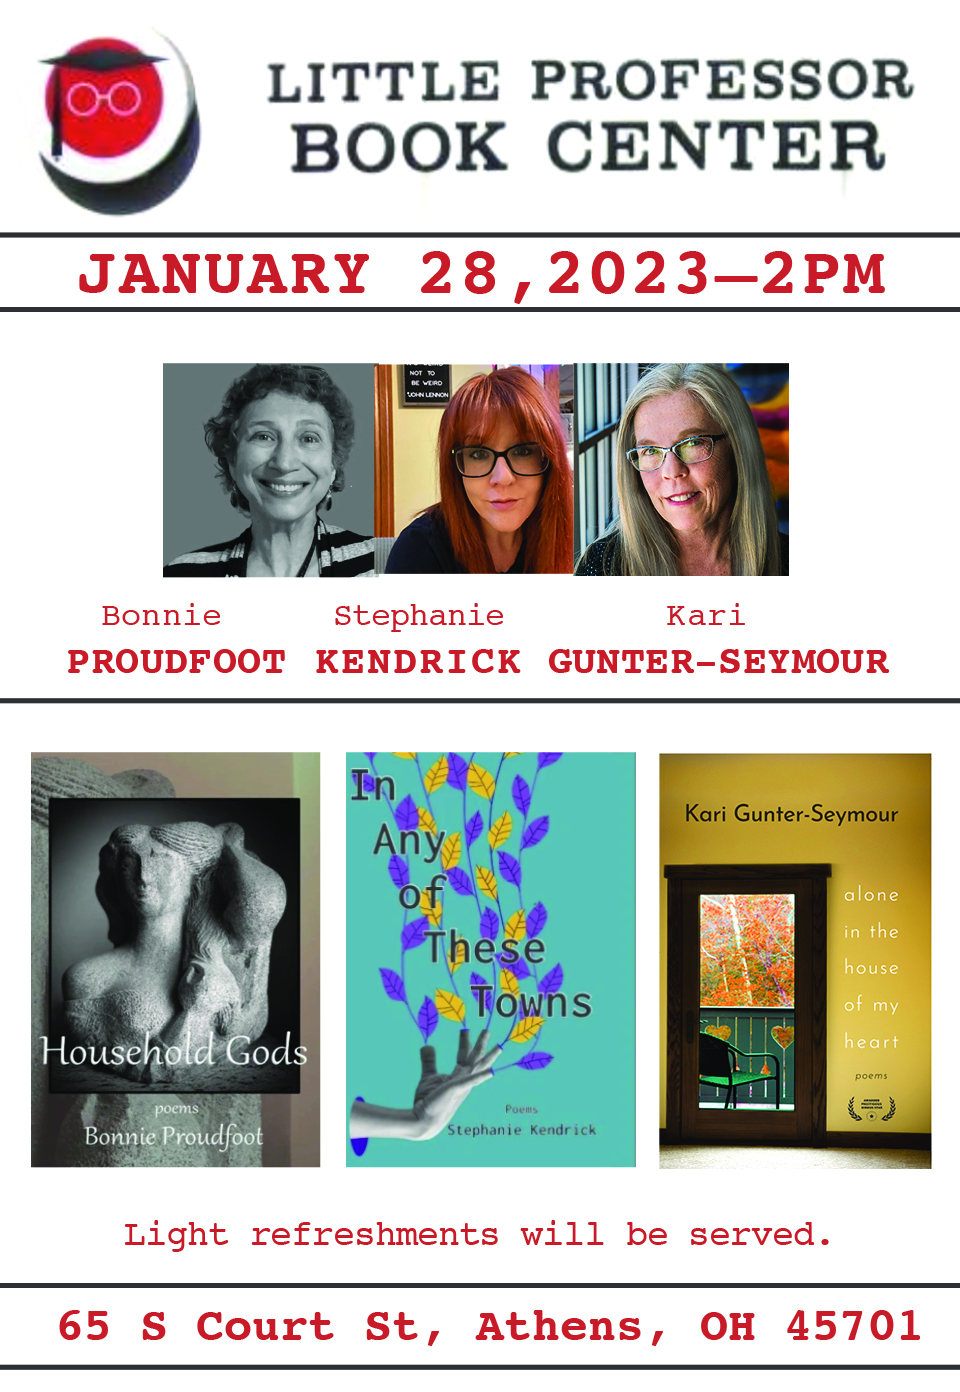 A flyer that reads: Little Professor Book Center January 28, 2023 - 2 p.m. poetry reading featuring: Bonnie Proudfoot, Stephanie Kendrick, and Kari Gunter-Seymour. Light refreshments will be served. 65 South Court Street, Athens OH 45701. There are images of all three poets above images of their recent poetry books.